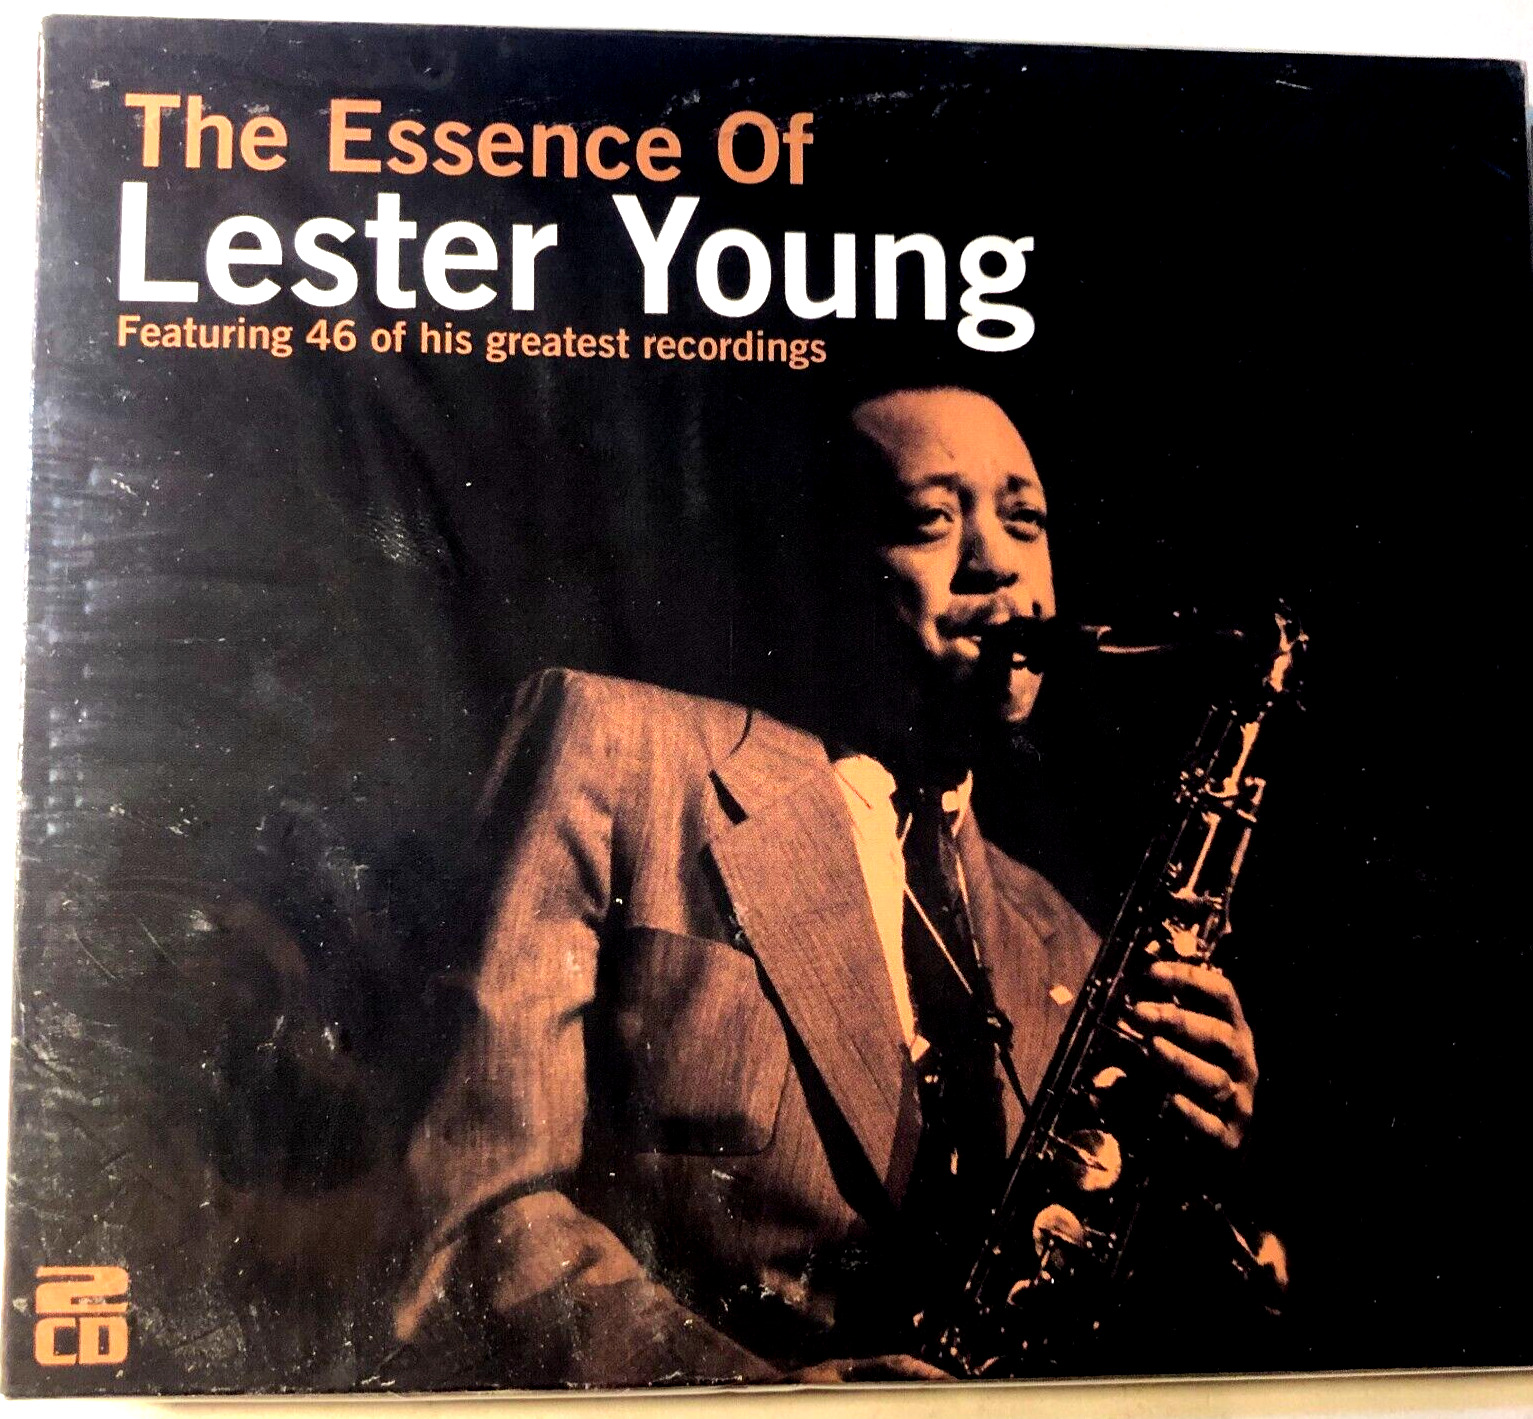 The Essence Of  by  Lester Young (2x CD   New sealed Eu import 16 Greatest Hits